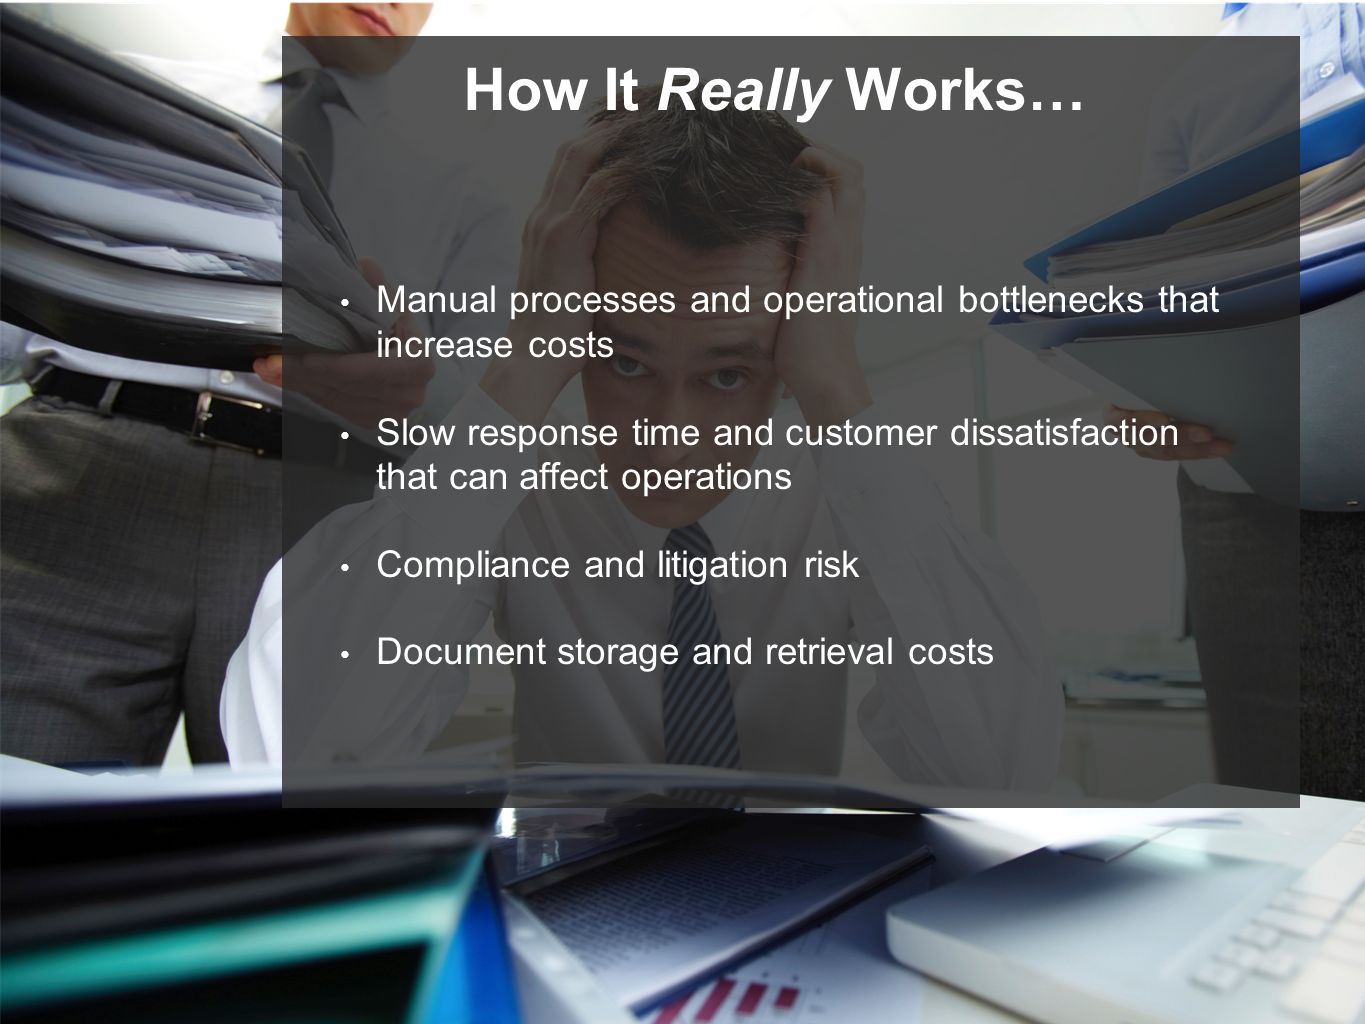 How It Really Works… Manual processes and operational bottlenecks that increase costs Slow response time and customer dissatisfaction that can affect operations Compliance and litigation risk Document storage and retrieval costs